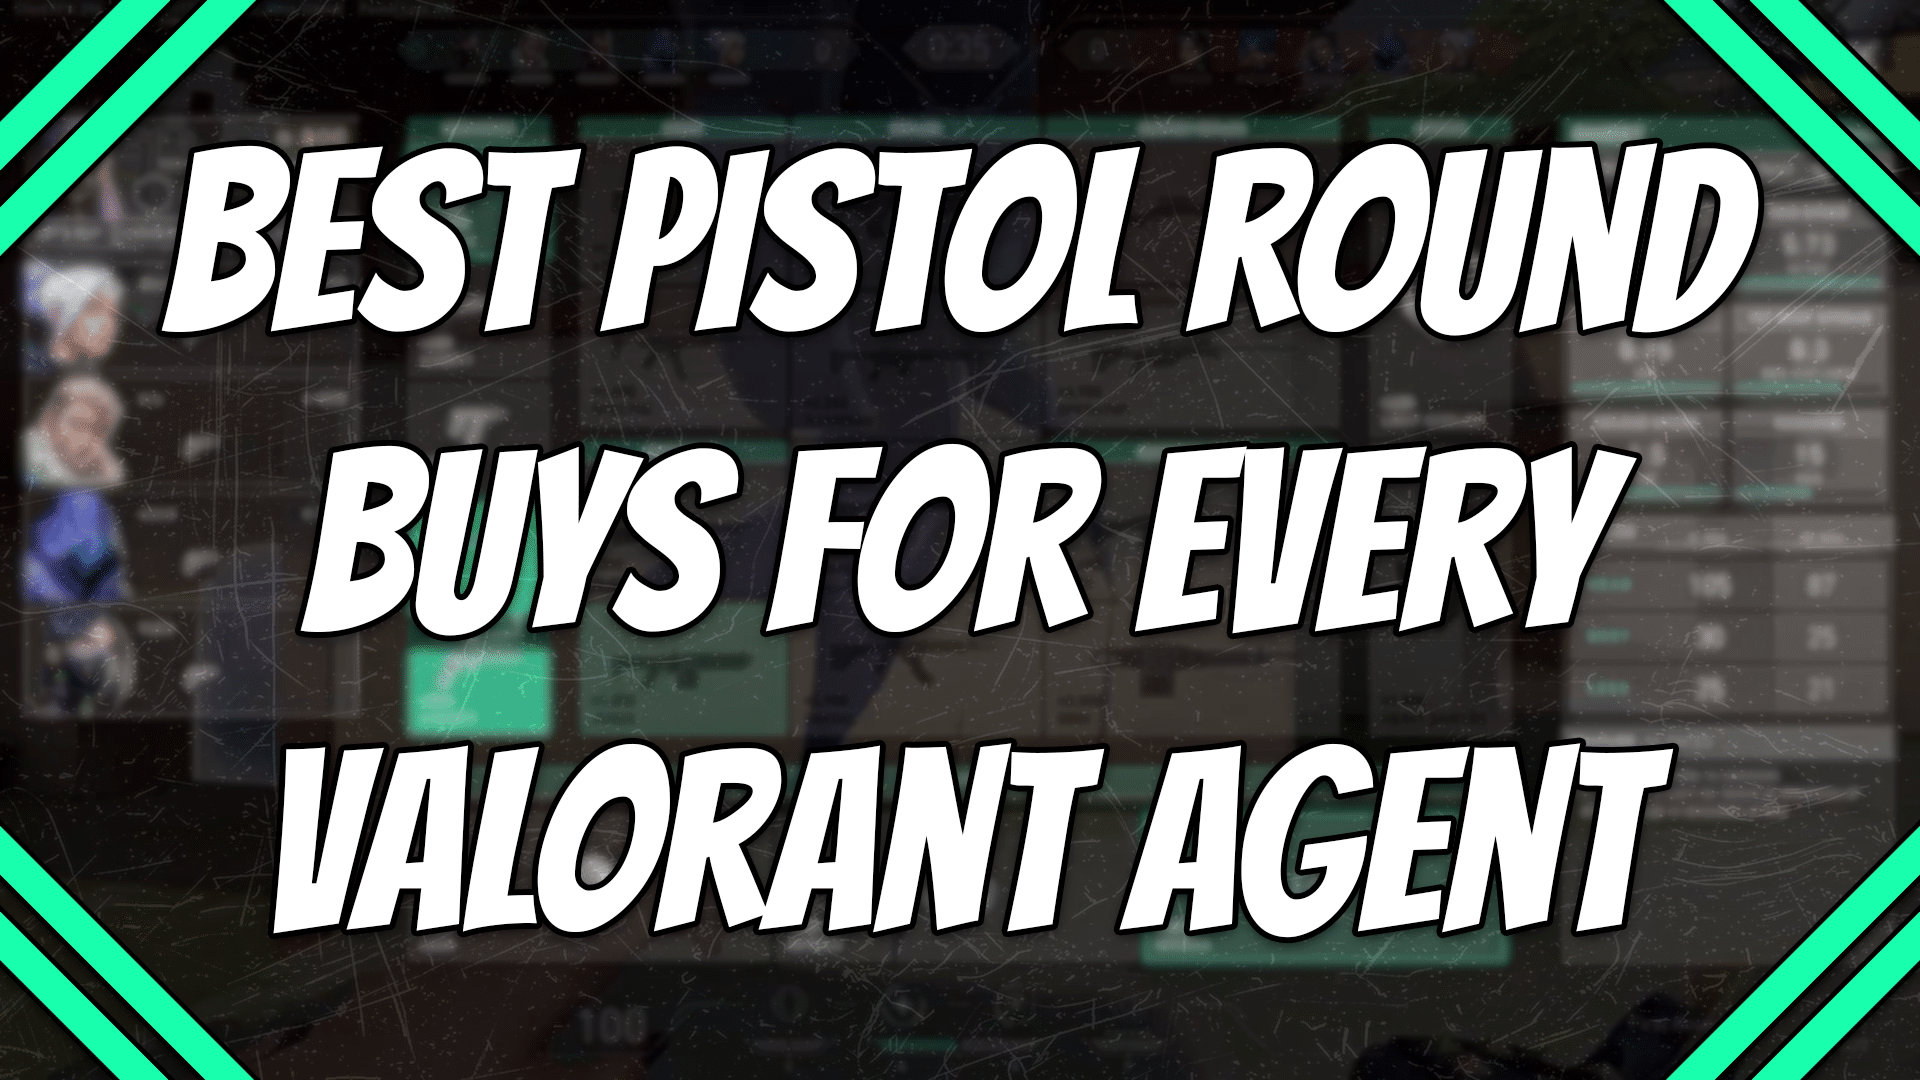 The Best Pistol Round Buys for Every Valorant Agent title agent